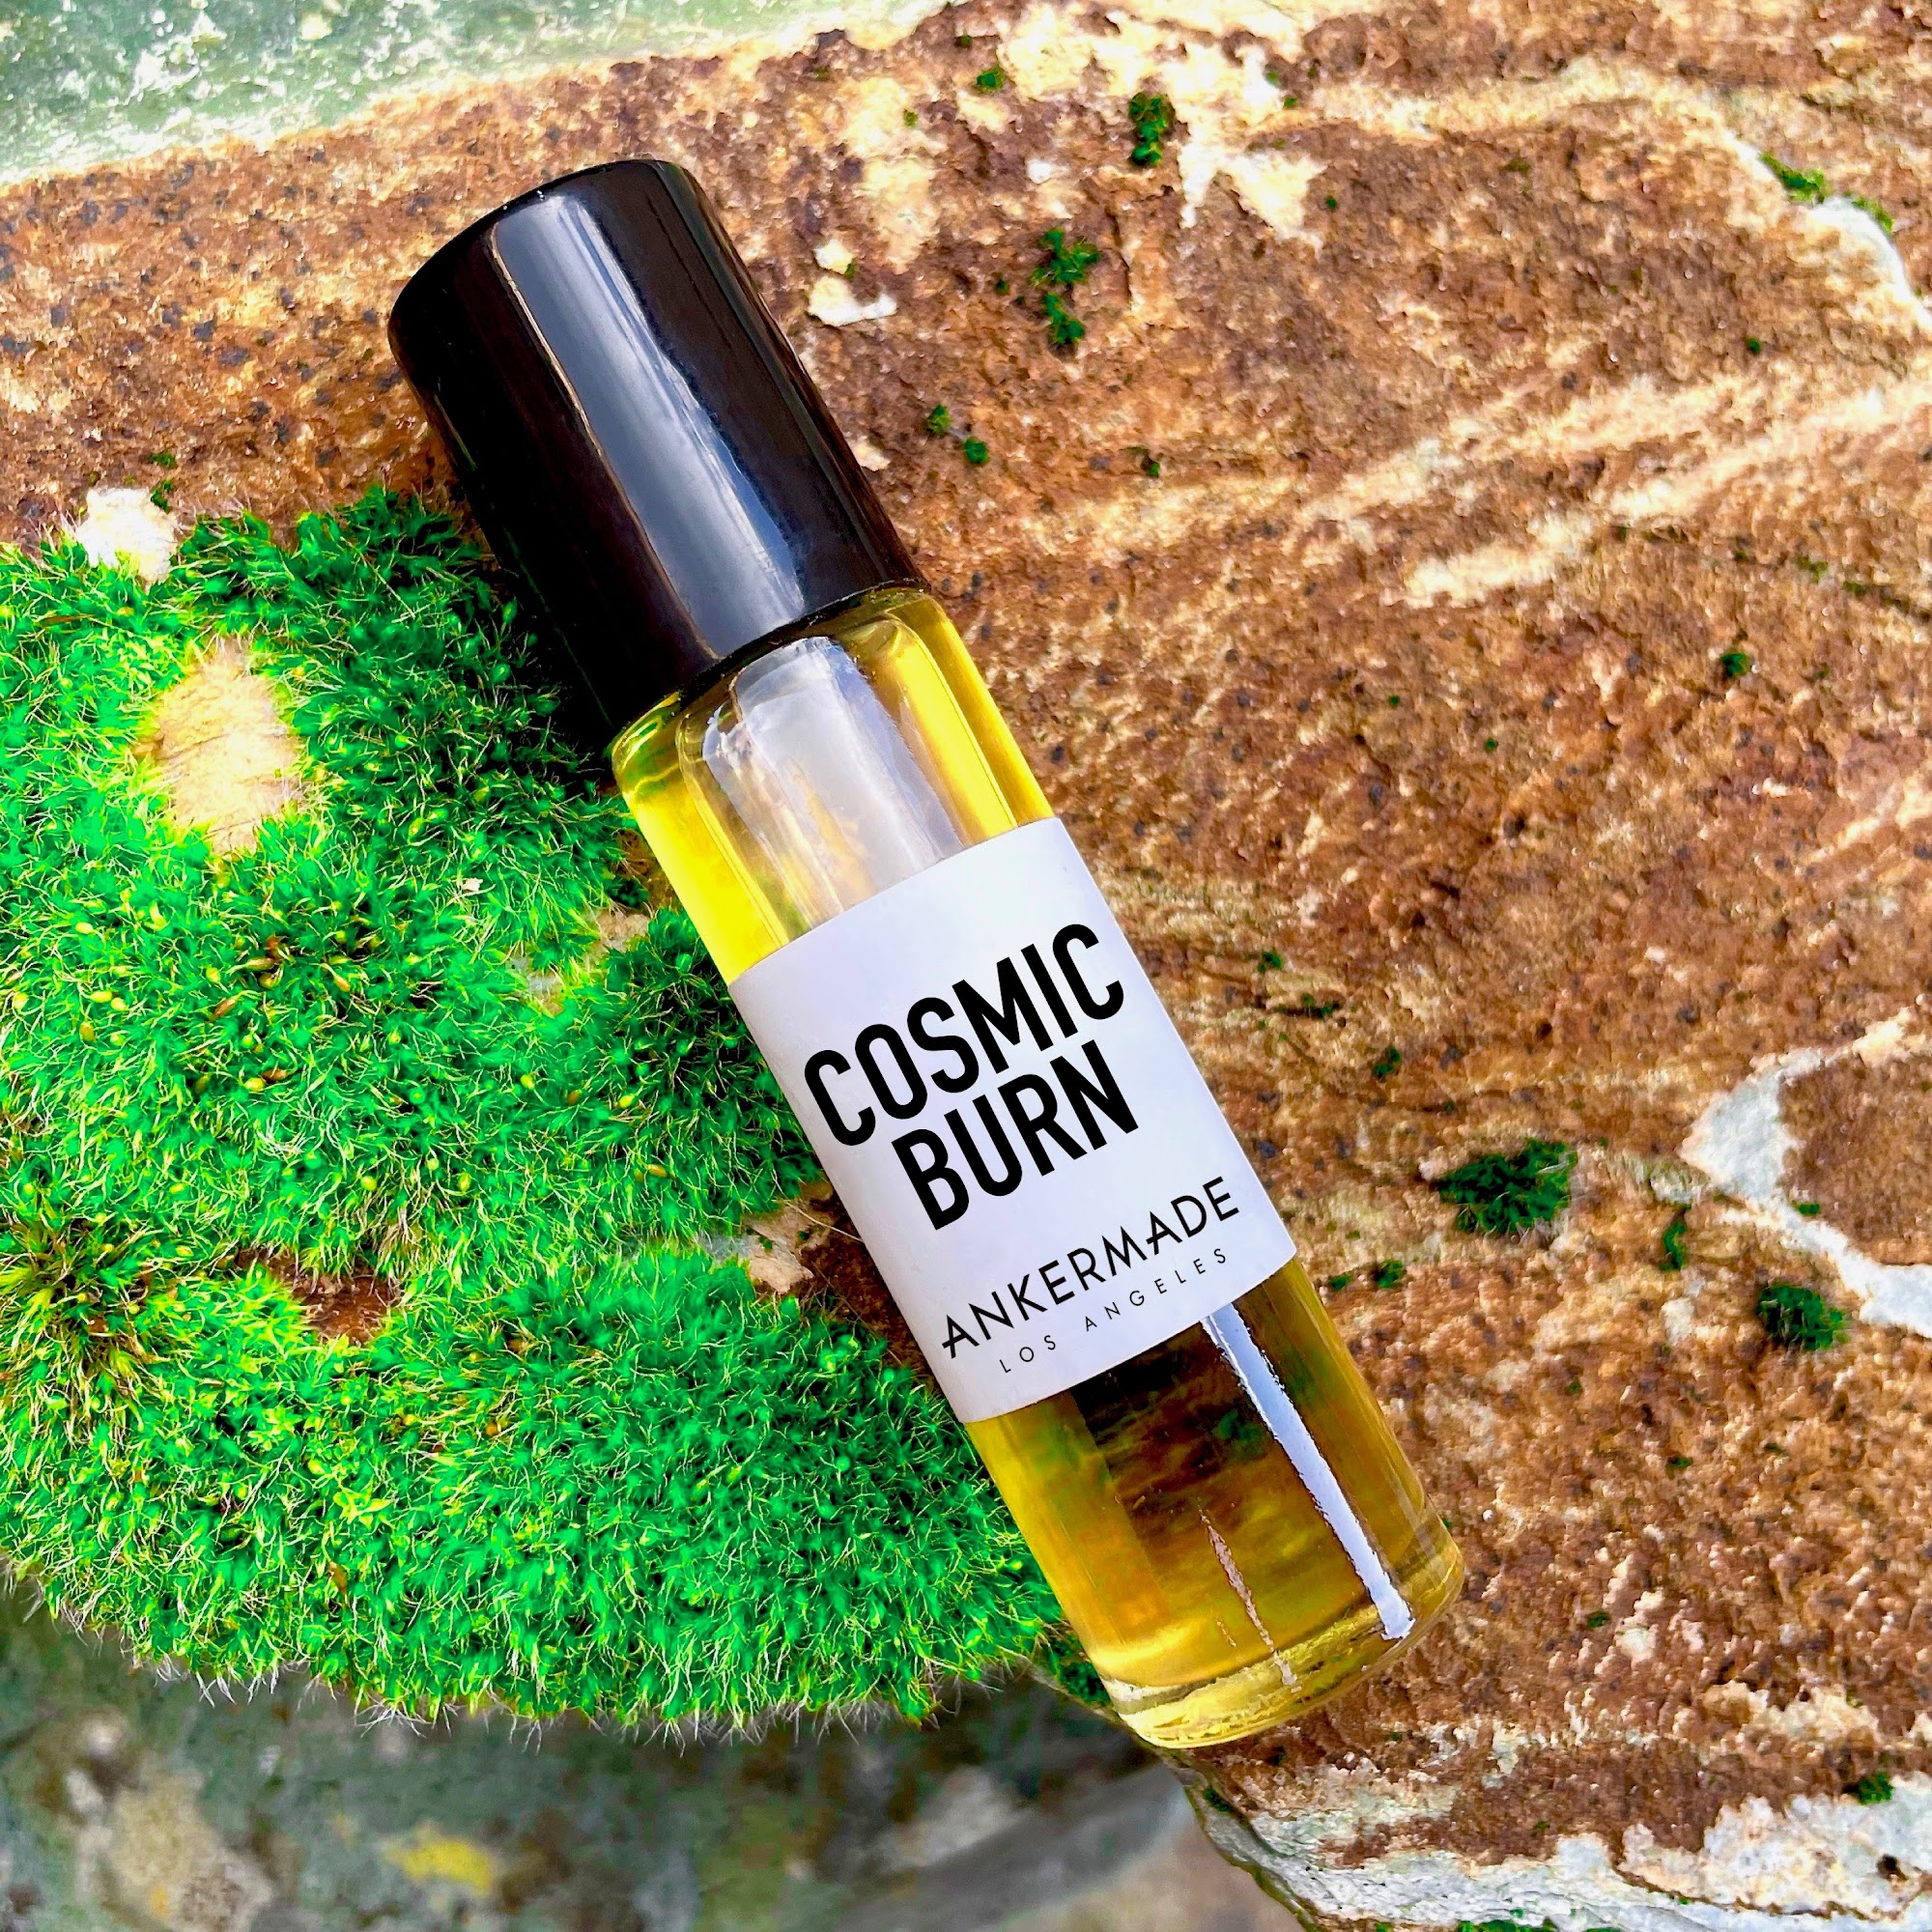 A bottle of Cosmic Burn, a perfume from Ankermade